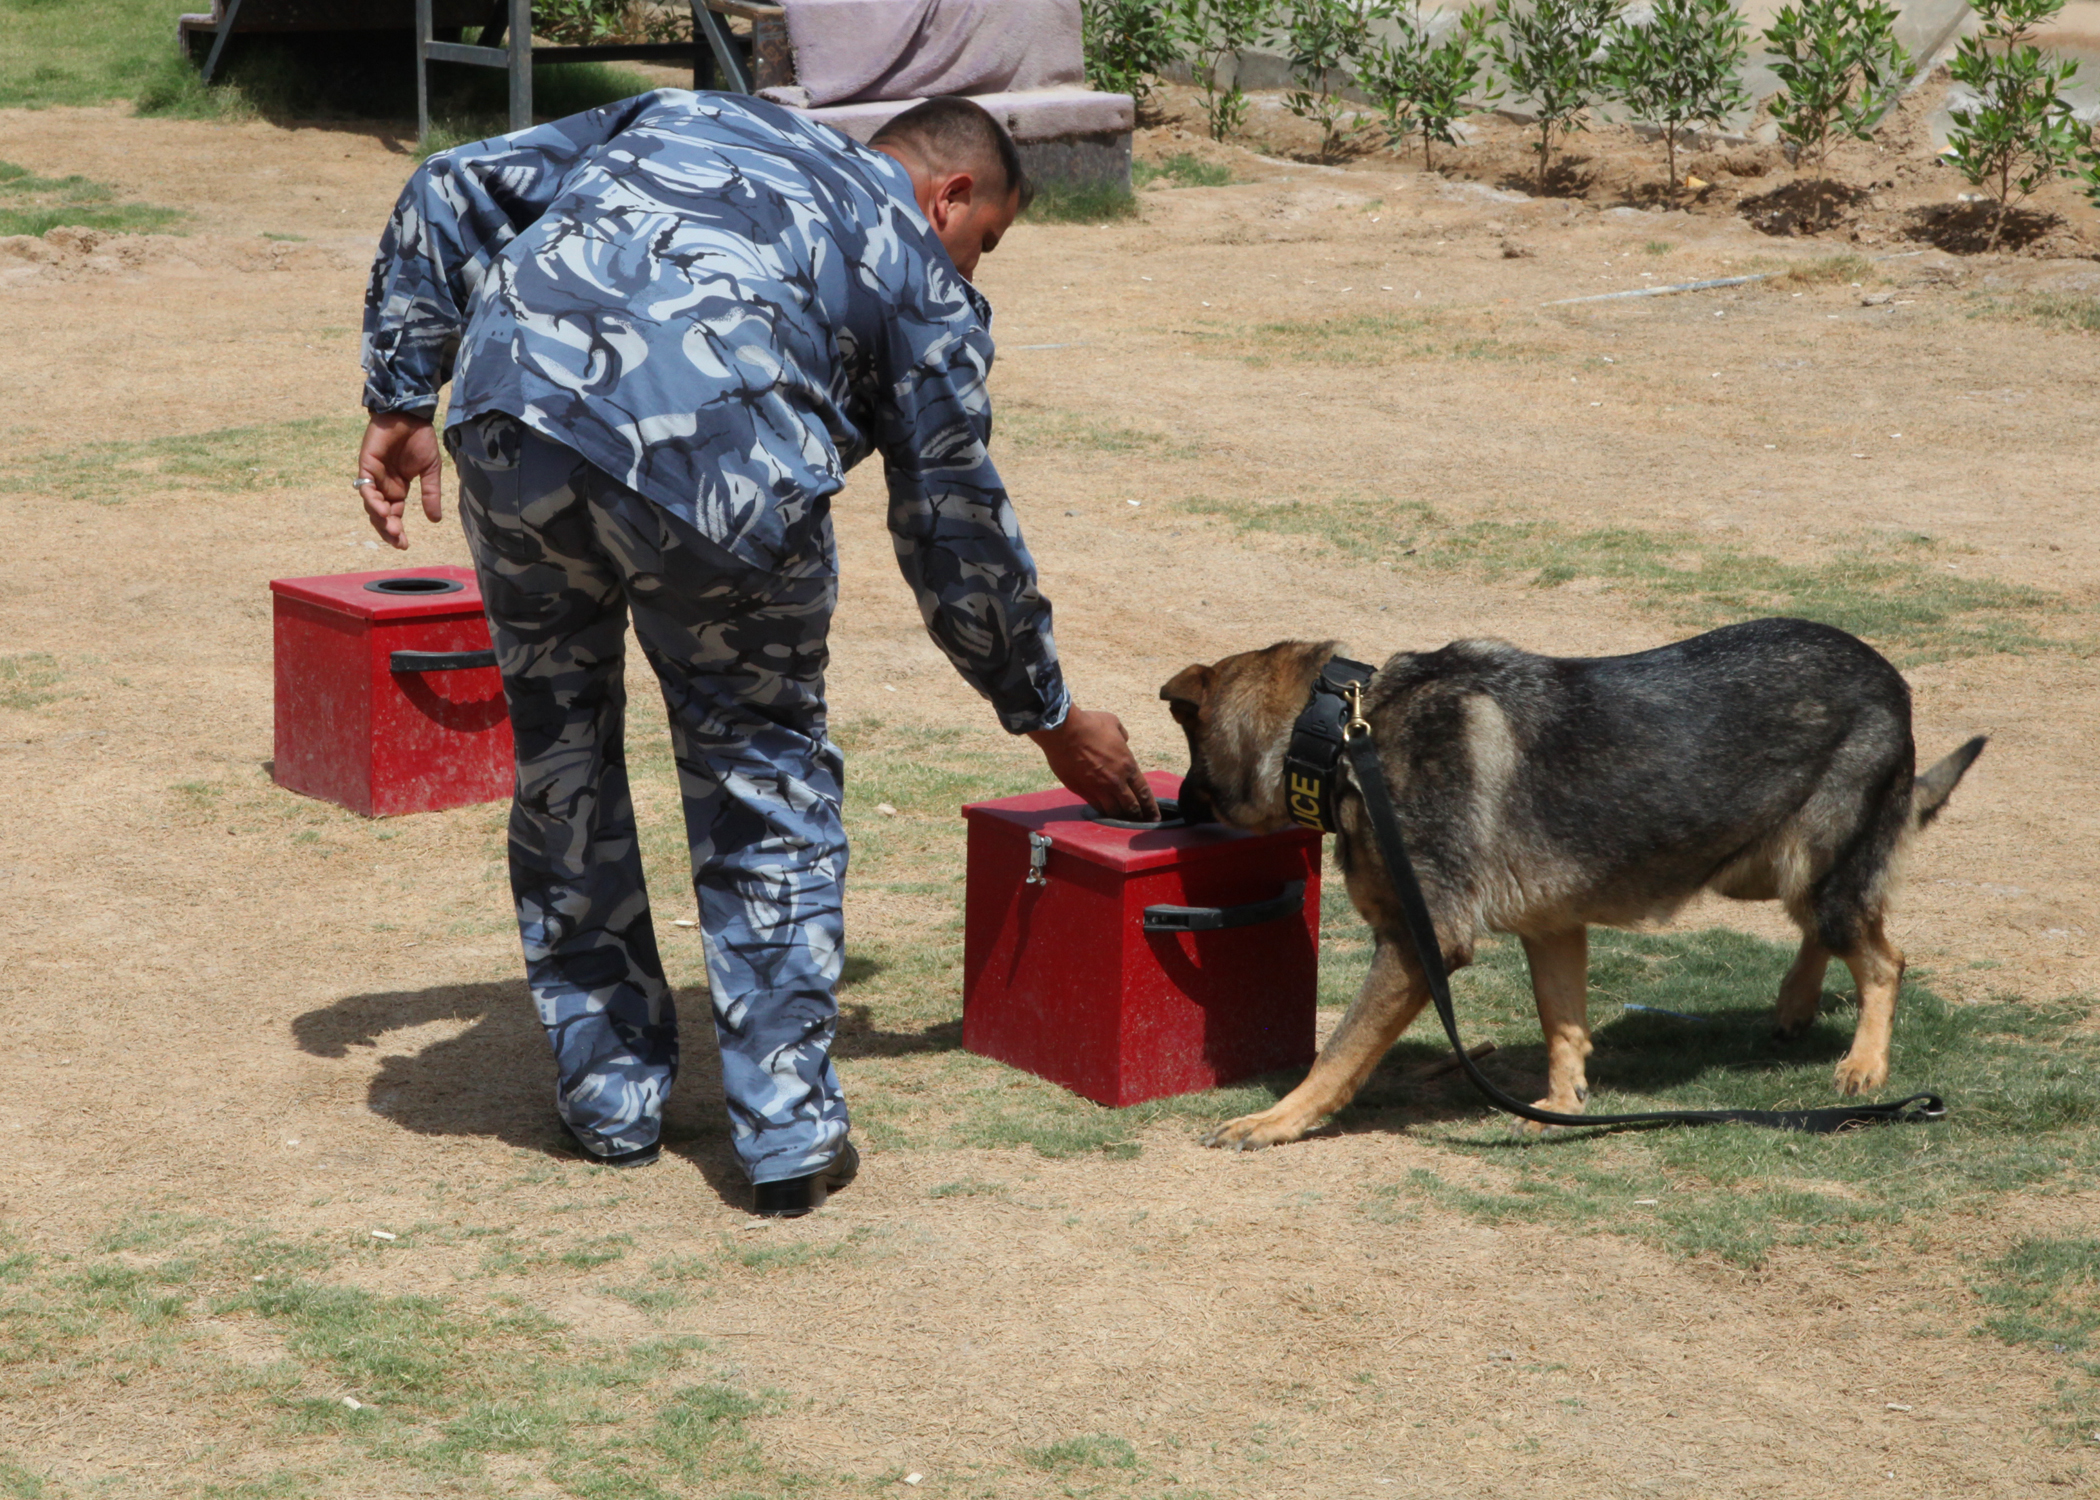 File:An Iraqi Police K9 dog searches for explosive materials assisted by  his trainer in Basrah, Iraq, May 3, 2011  - Wikimedia  Commons